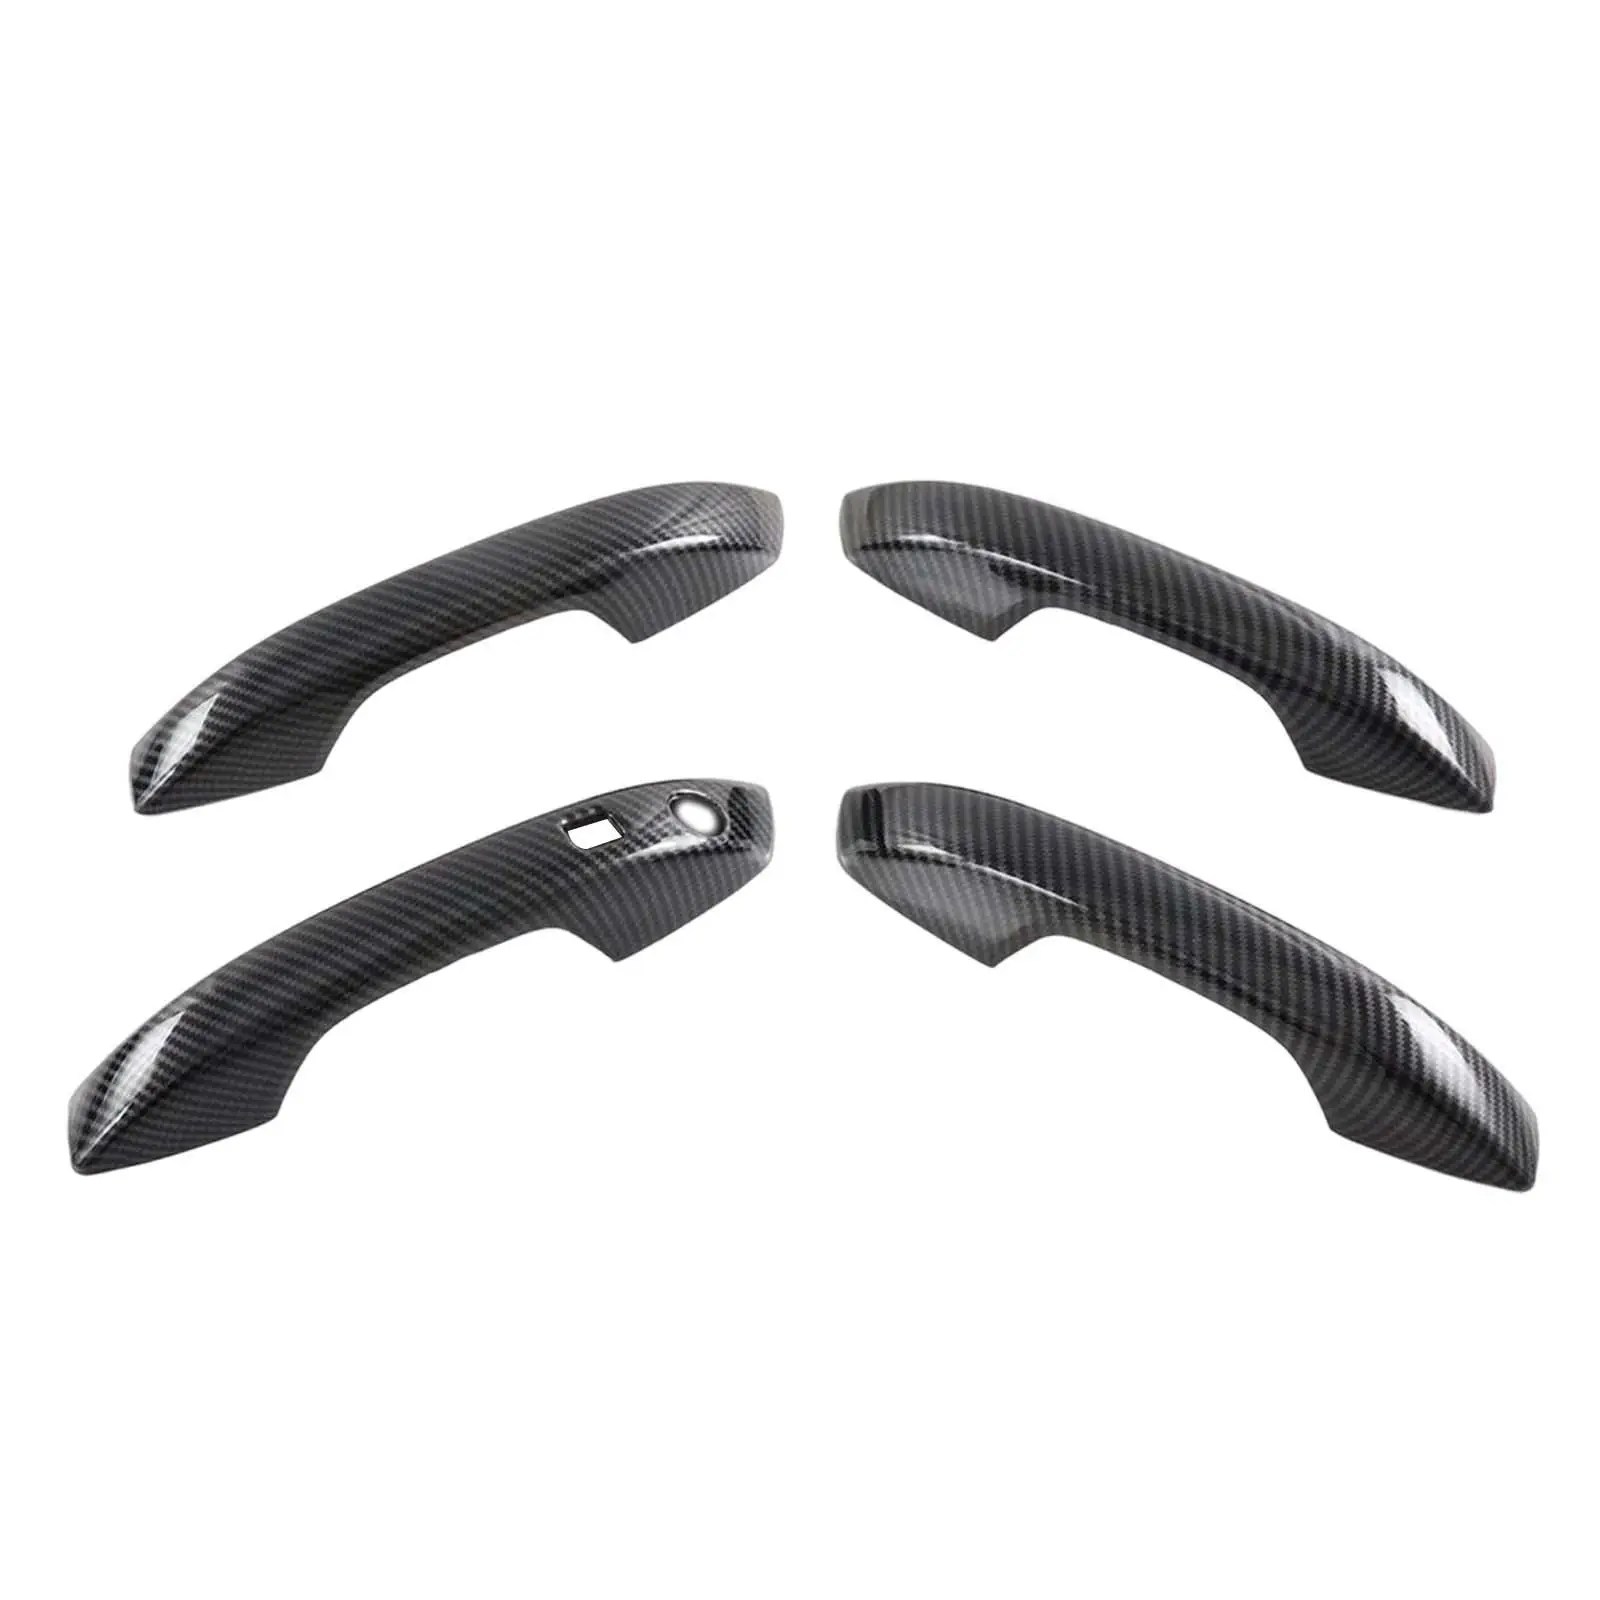 4Pcs Car Door Handle Protective Cover Scratch Guard Durable Parts Decorative Replacement Trim Protector for Byd Yuan Plus